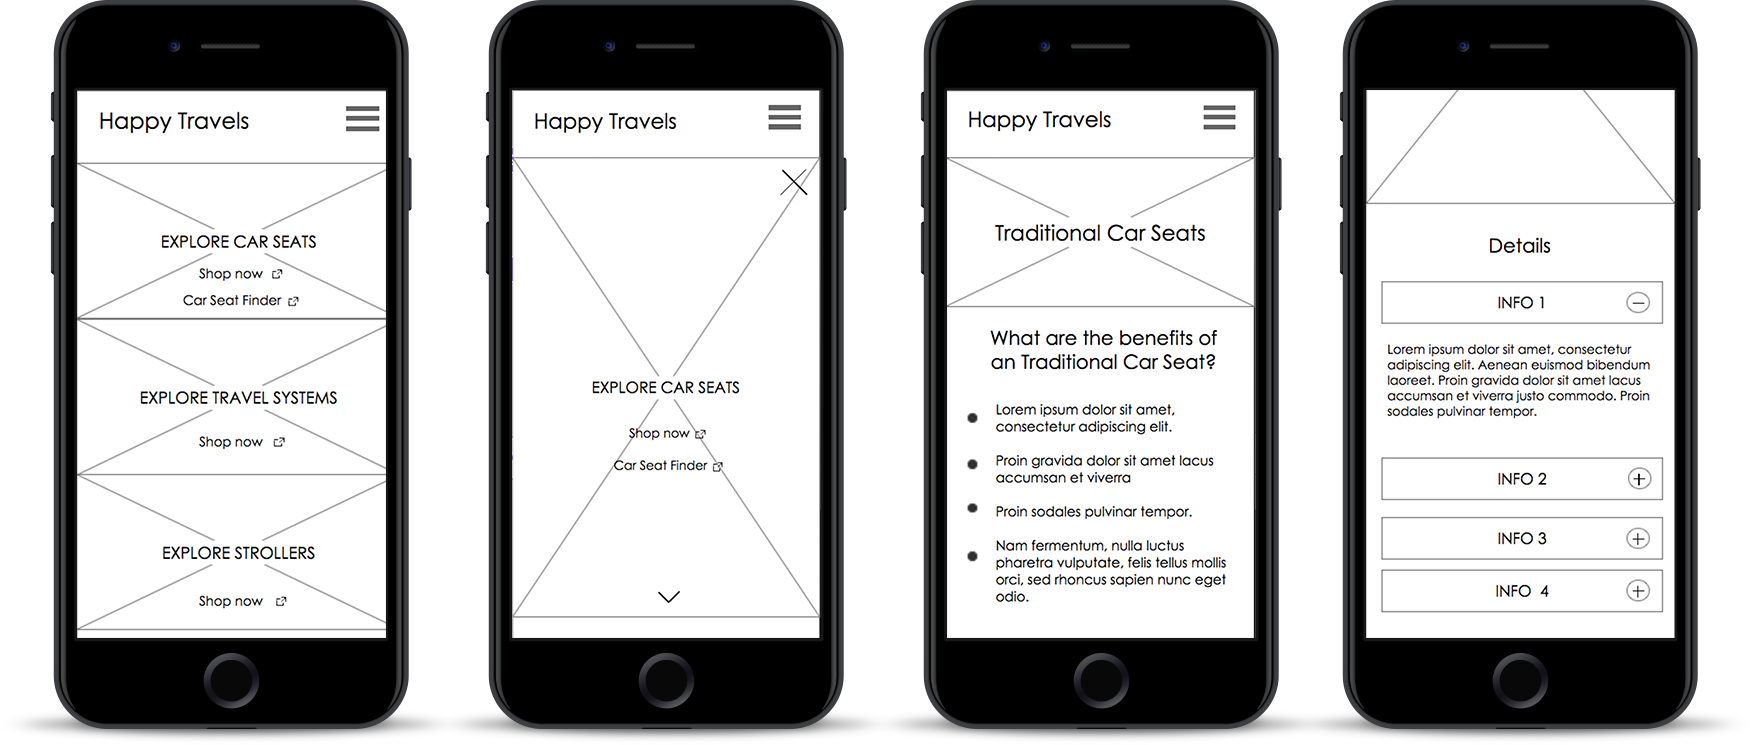 Happy Travels wireframe mobile